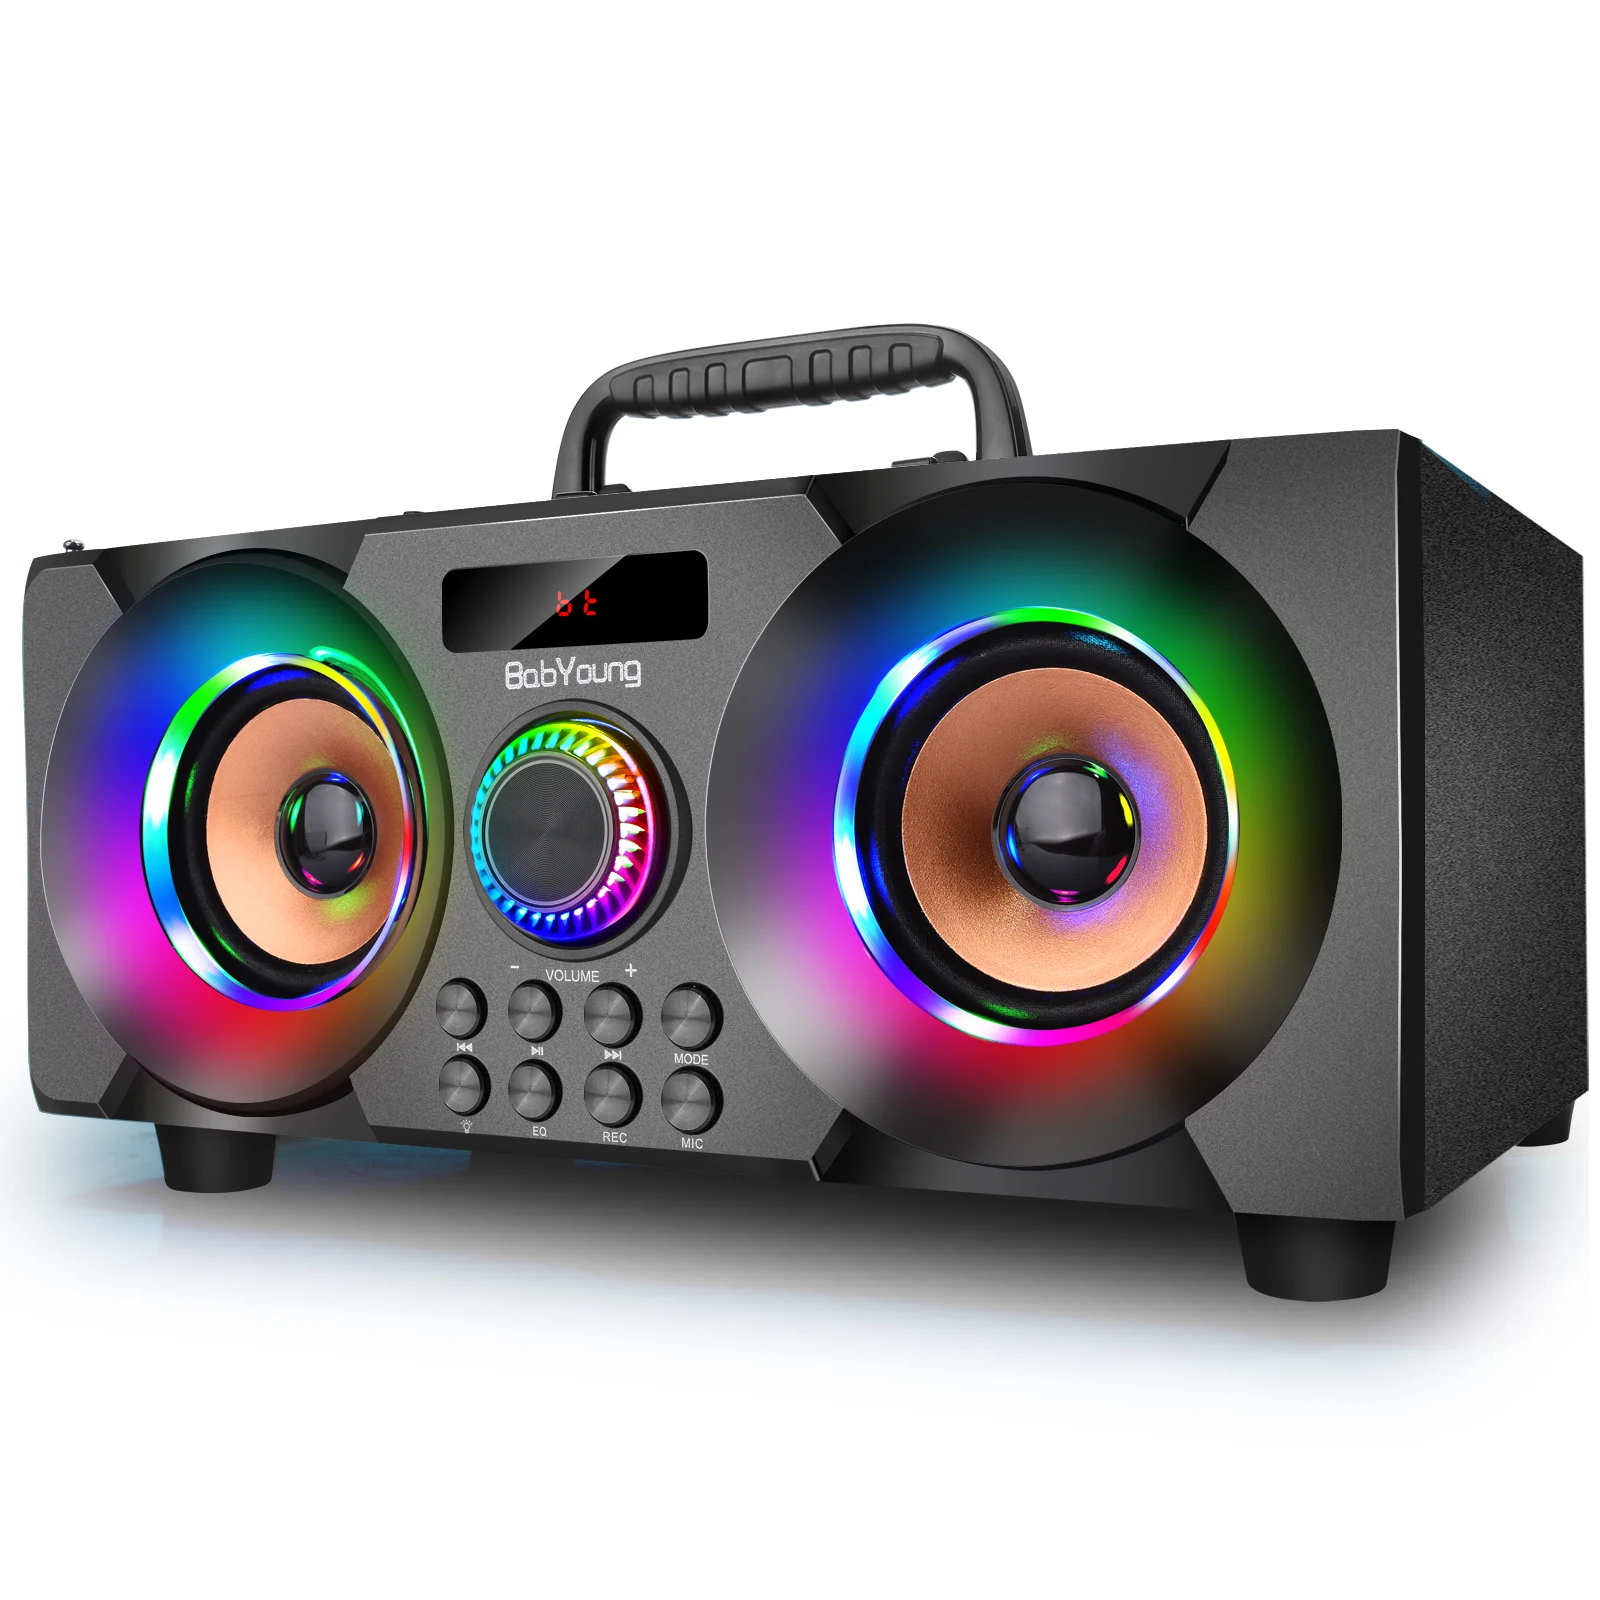 

60W Portable Boombox Bluetooths Speaker with Subwoofer Wireless Outdoor Stereo Bass Party Speakers Support FM Radio LED Lights